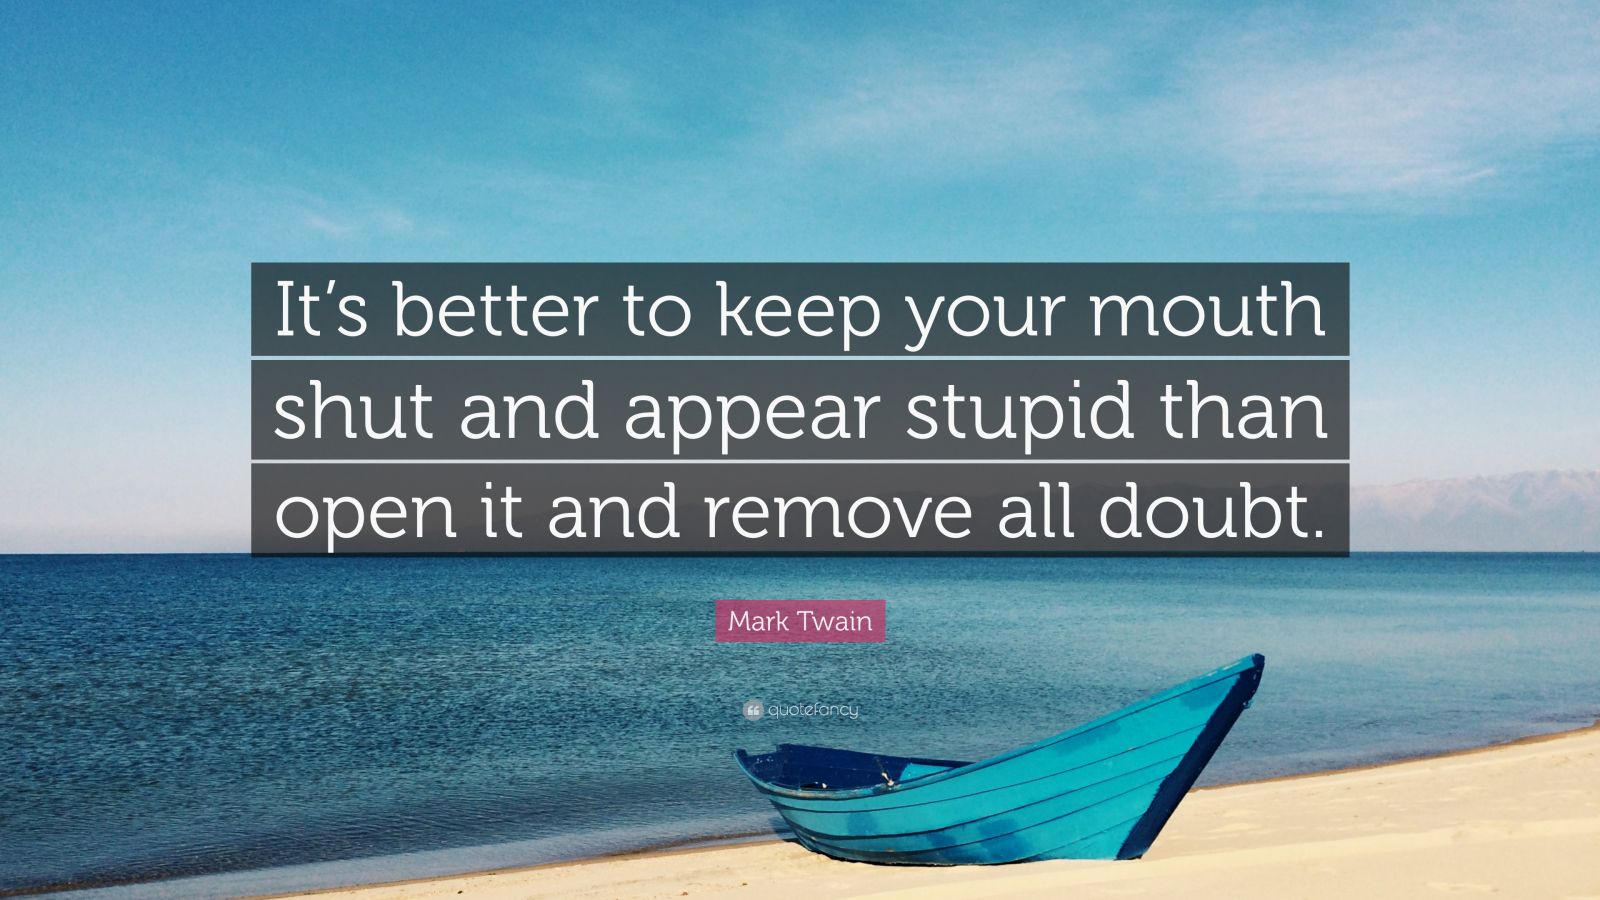 Mark Twain Quote “its Better To Keep Your Mouth Shut And Appear Stupid Than Open It And Remove